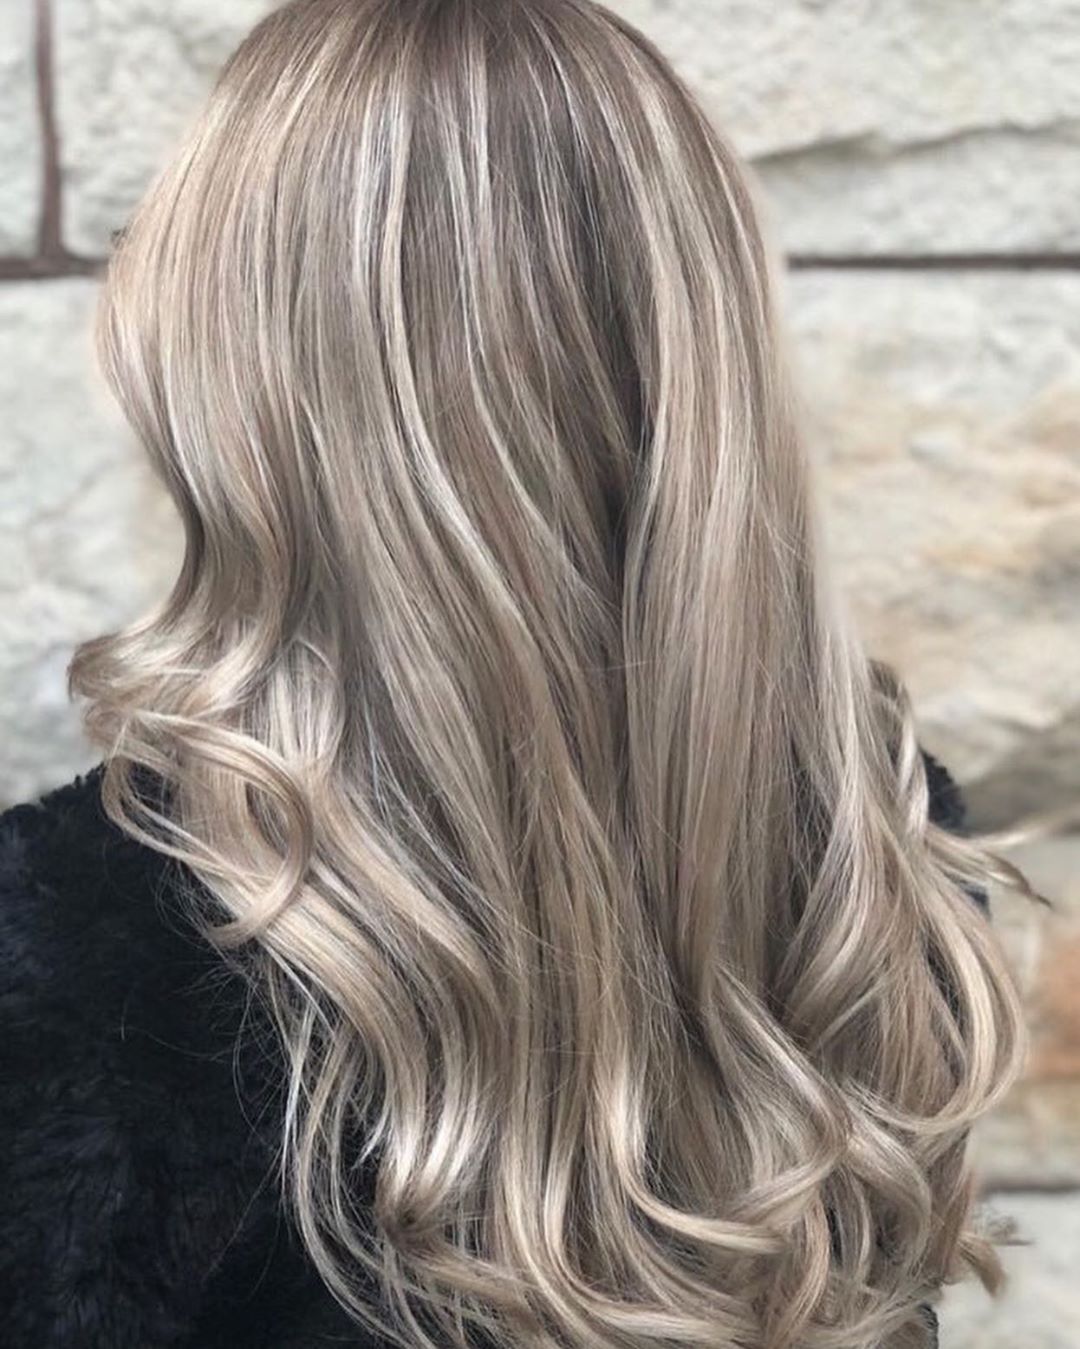 Matrix - BLONDE AMBITION 🏆 A very special congratulations to our 2  #MatrixNordicBlondes competition winners for these amazing blonde transformations 😍 
🇸🇪 @hairby.eve with a stellar dimensional balay...